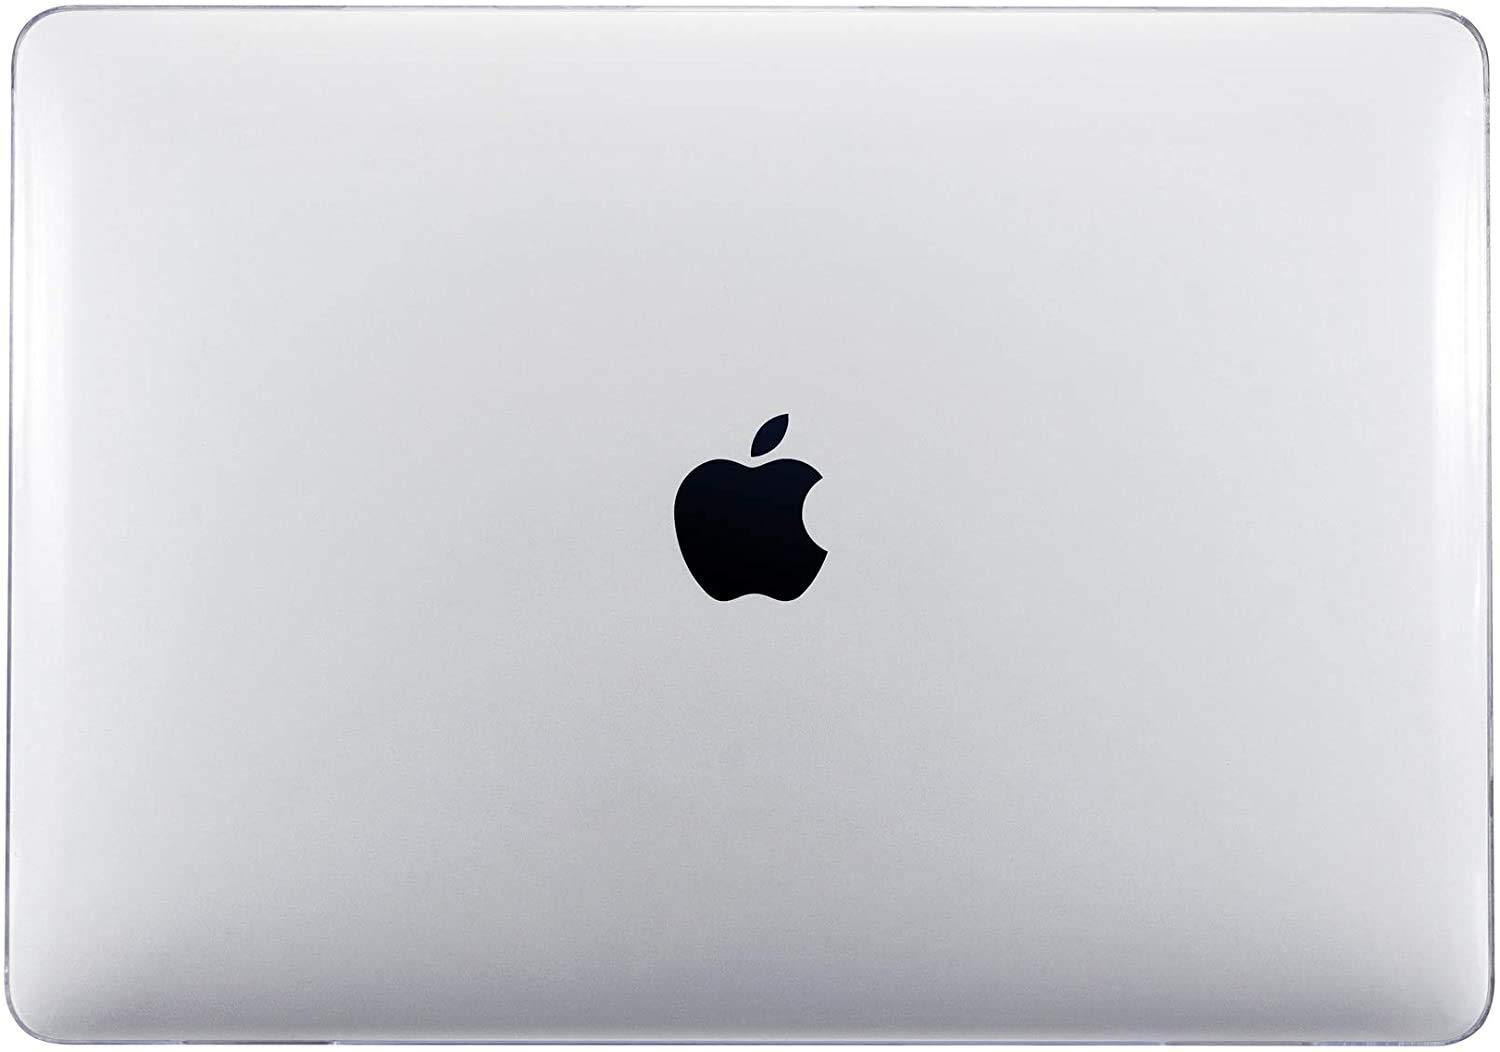 Case Cover for Macbook - Customized - iFyx